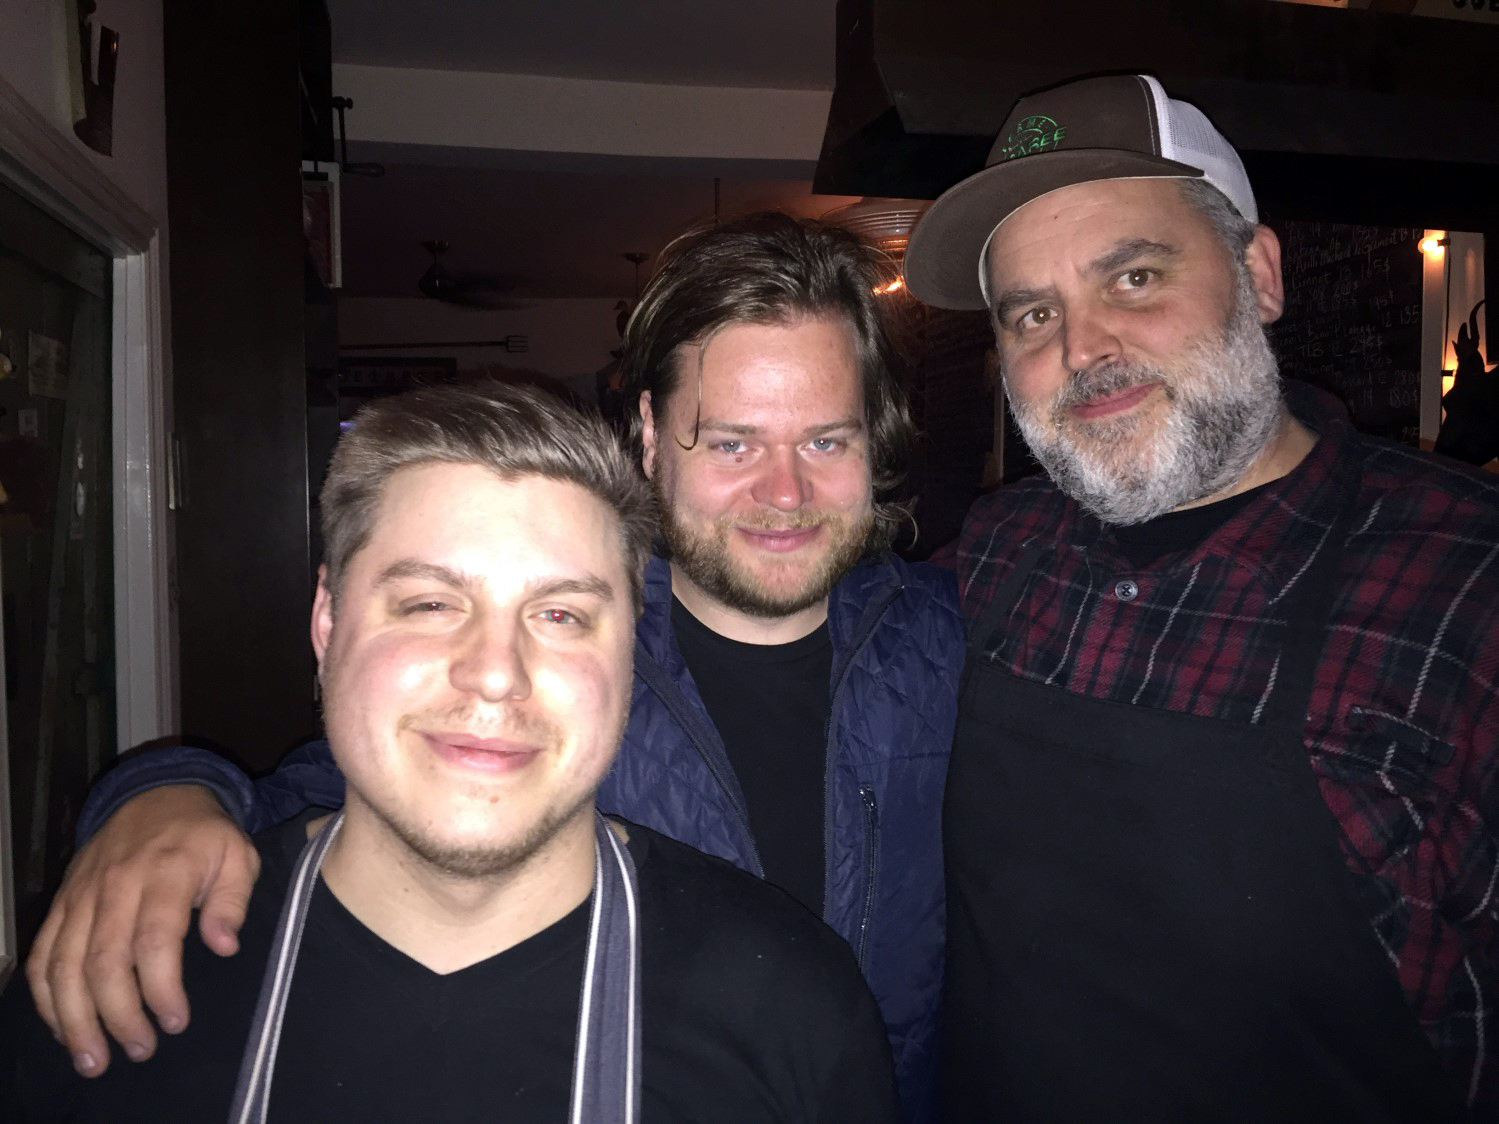 Magnus with local restaurant Joe Beef's chef Marc-Olivier Frappier and owner David McMillan